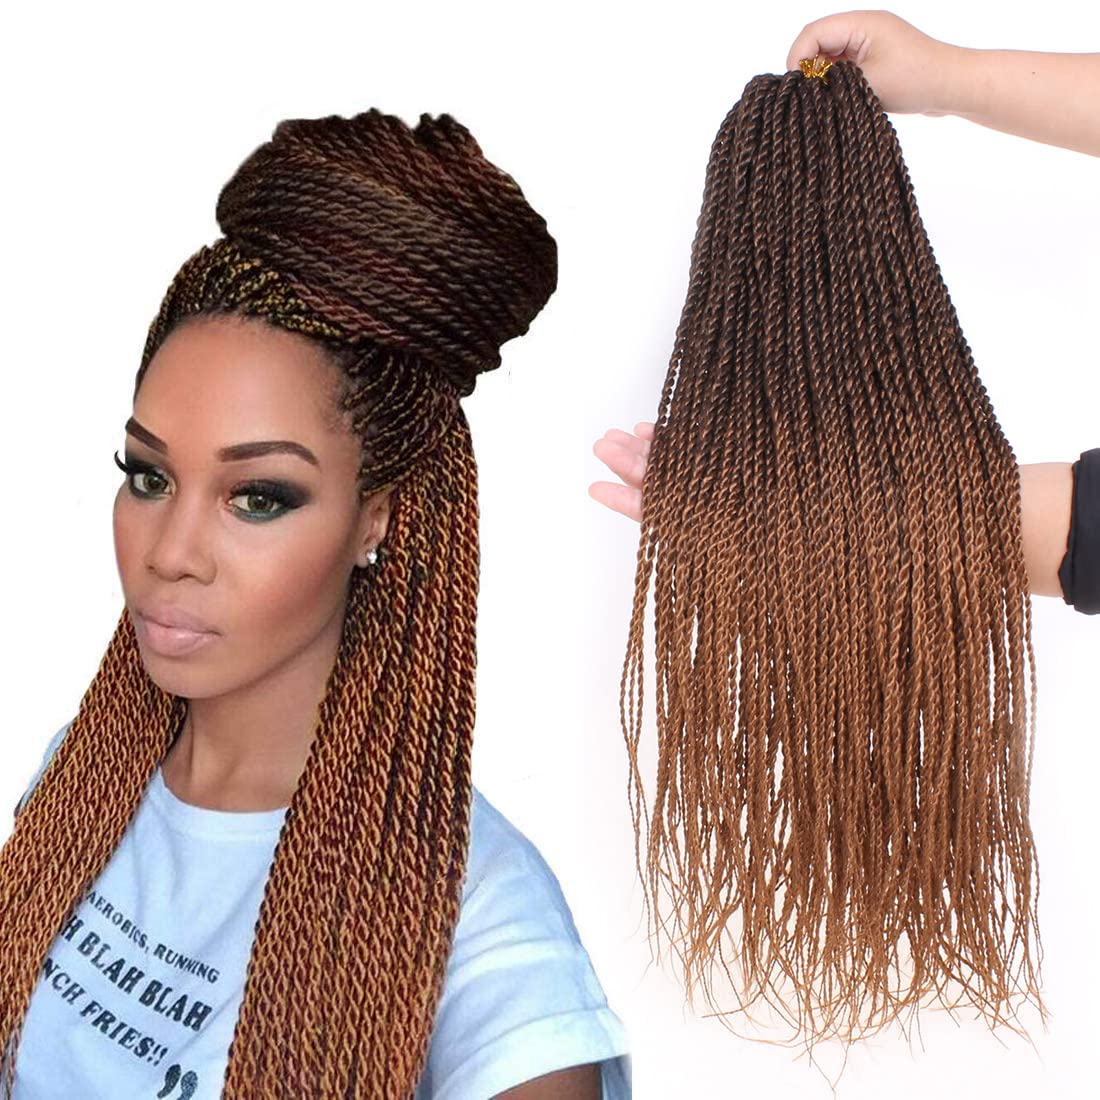 22 Inch Ombre Color Senegalese Twist Hair Crochet Braids 30 Stands 18 Inch Synthetic Senegalese Twists Braiding Hair Extensions